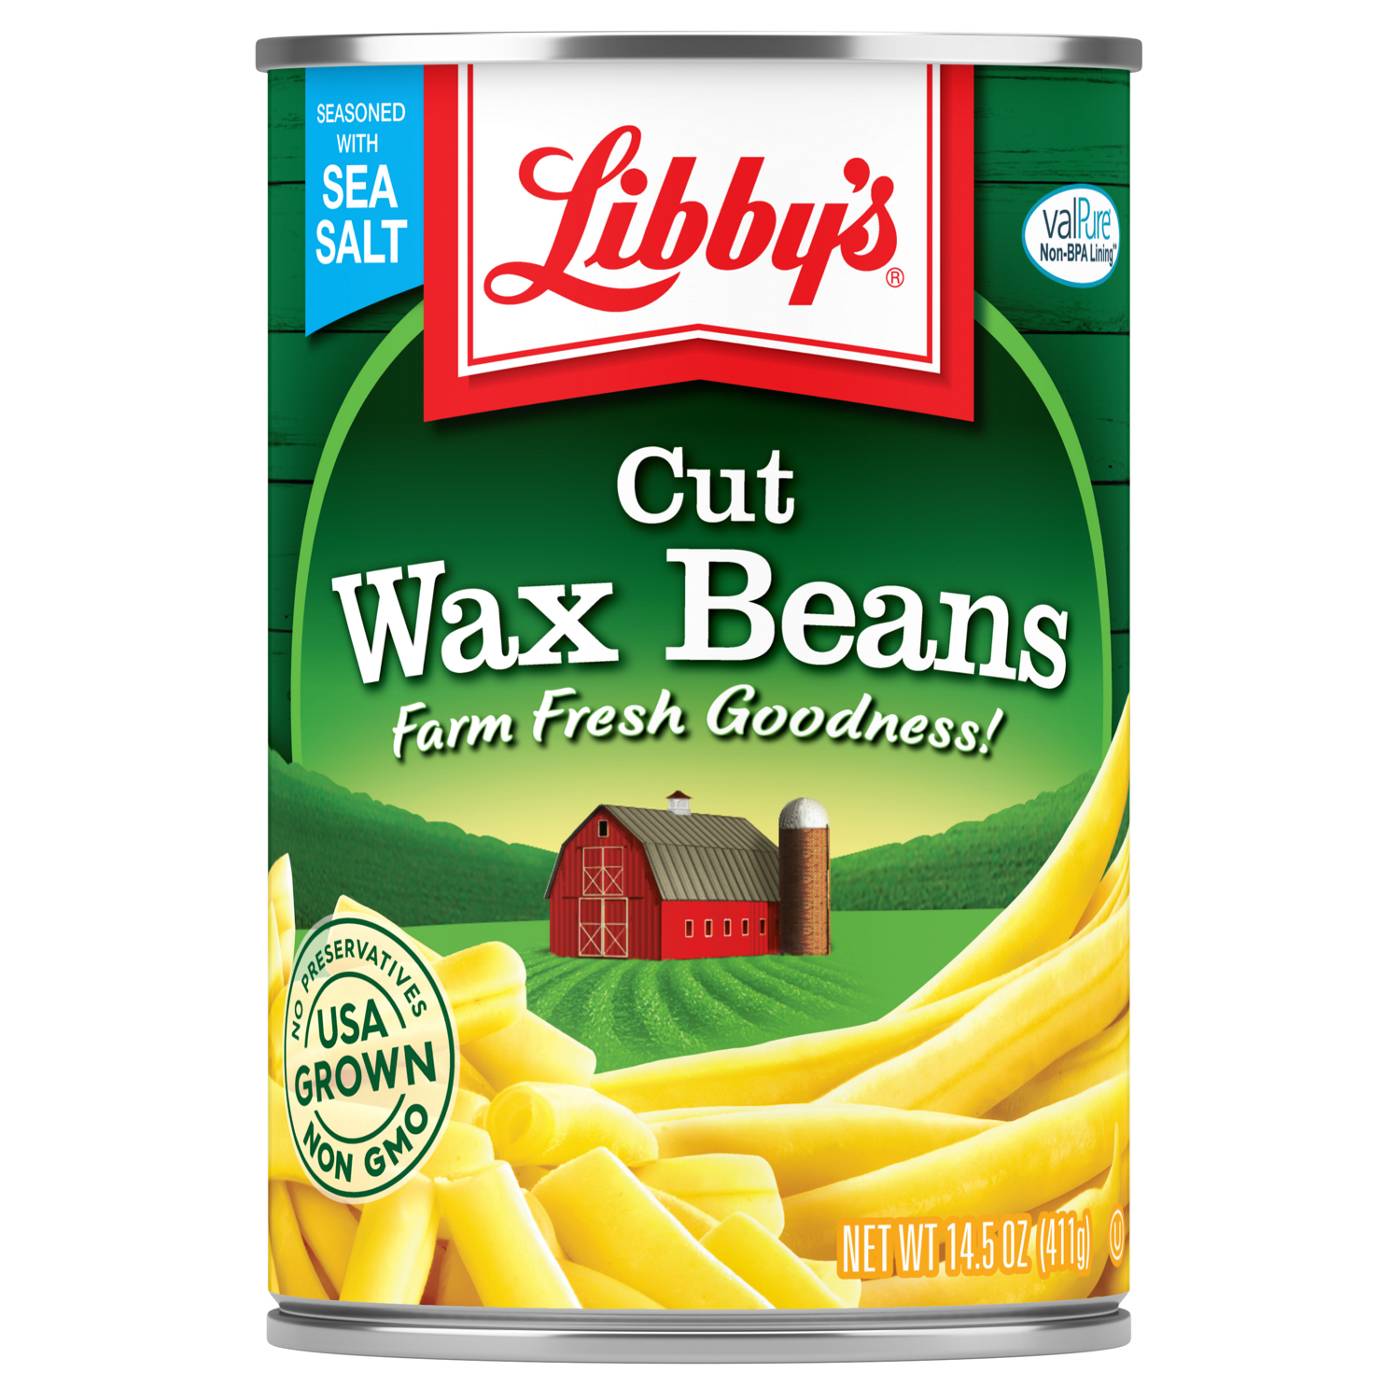 Libby's Cut Wax Beans; image 1 of 5